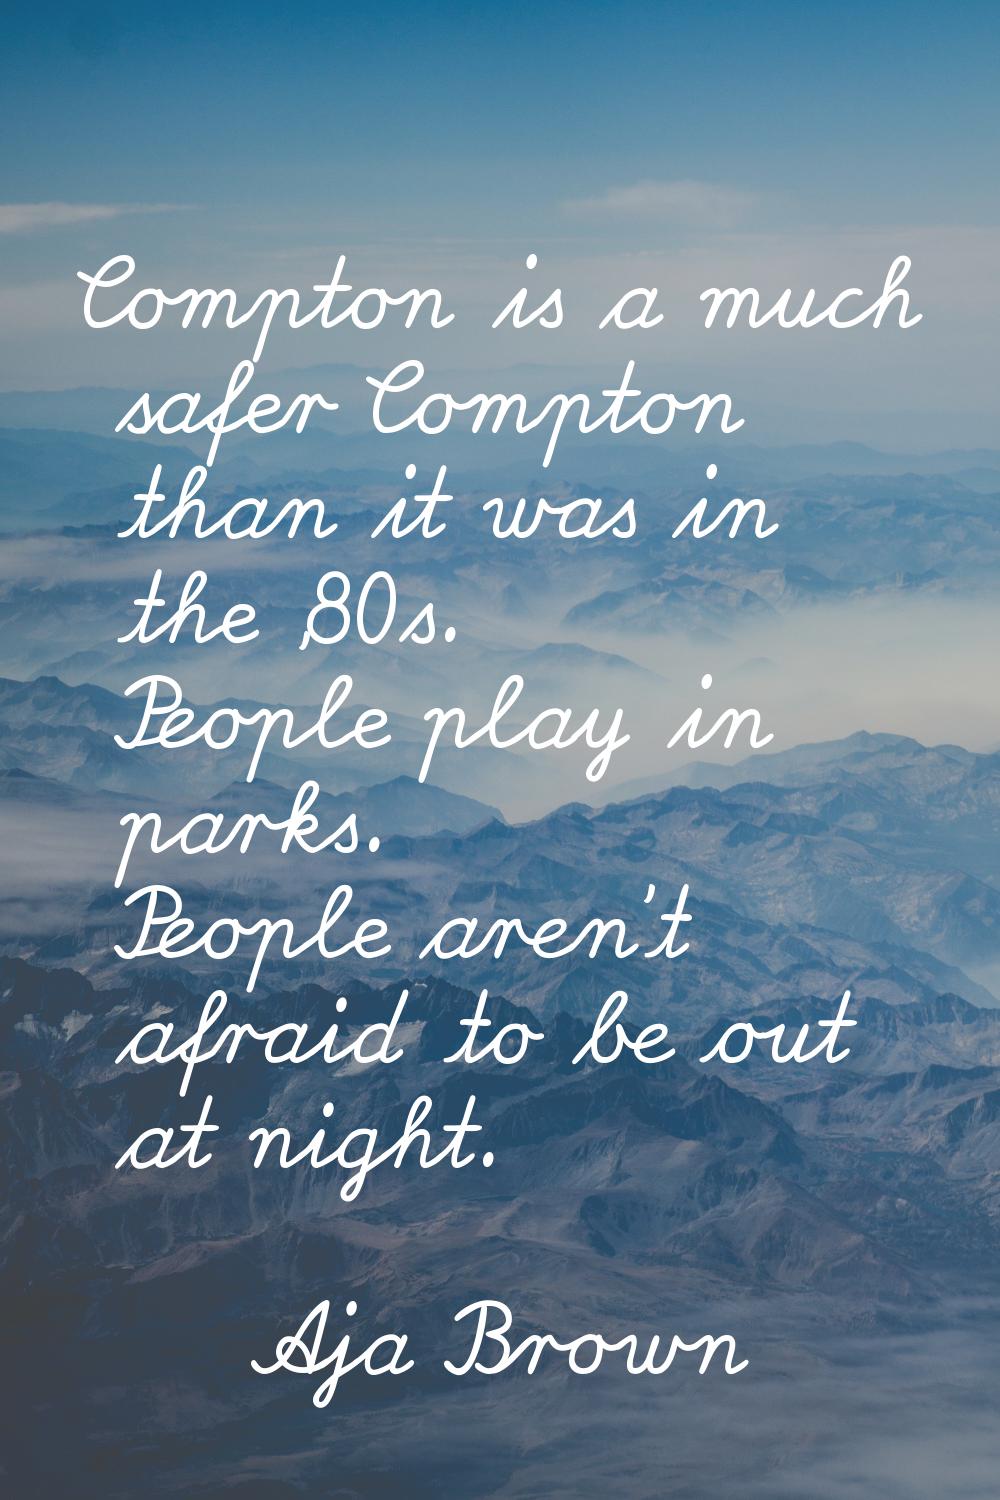 Compton is a much safer Compton than it was in the '80s. People play in parks. People aren't afraid